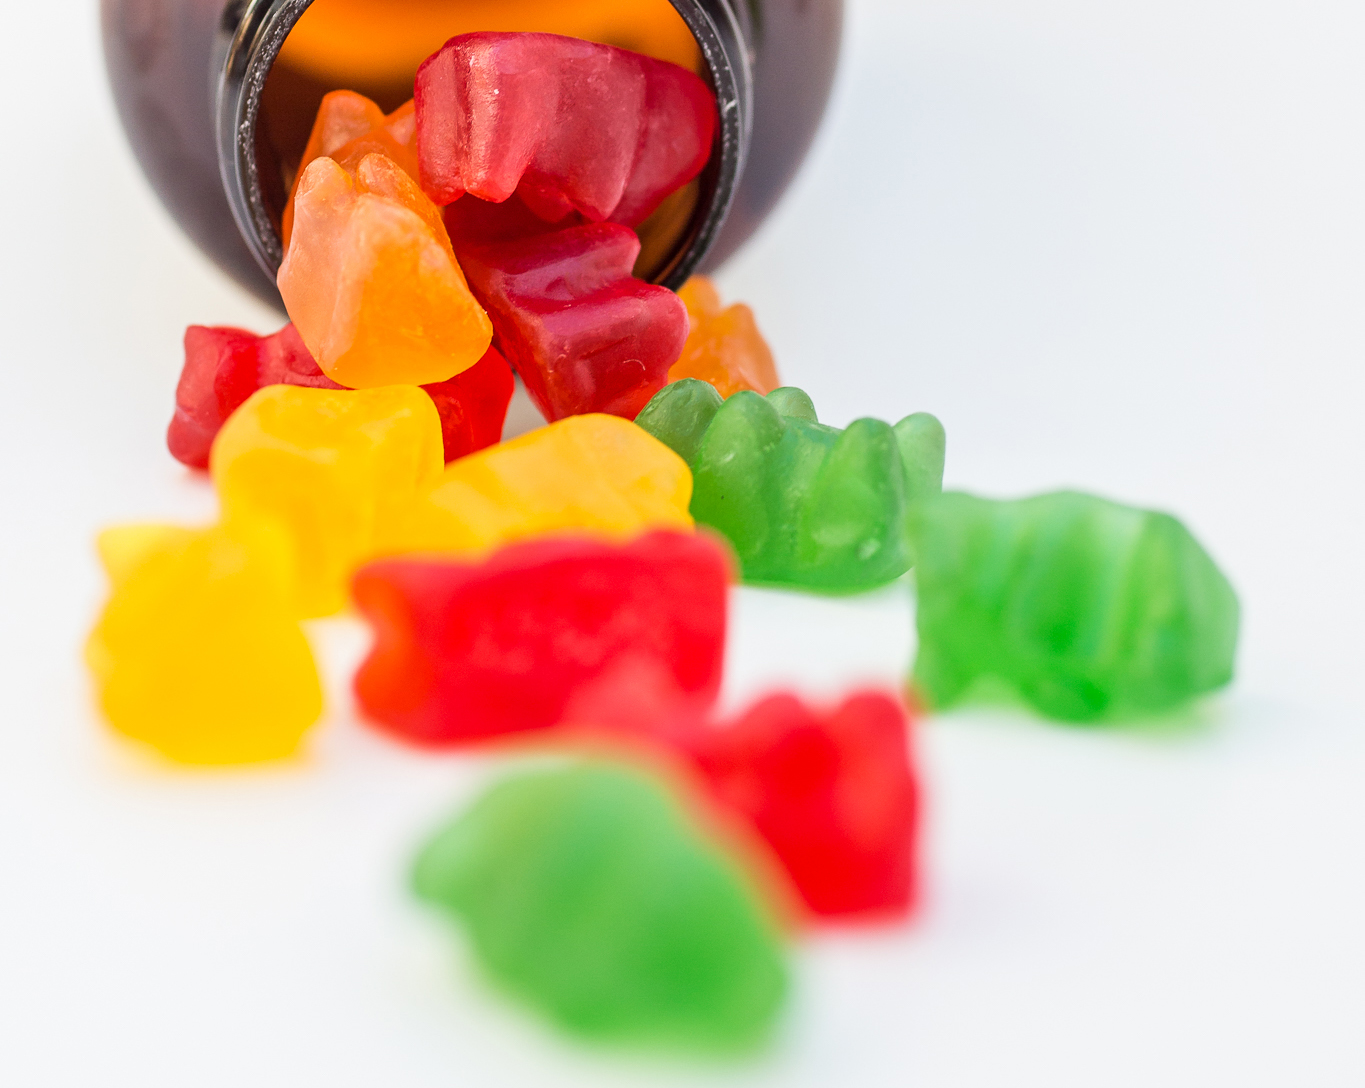 Helpful Information About Storing Your Food and CBD Gummies